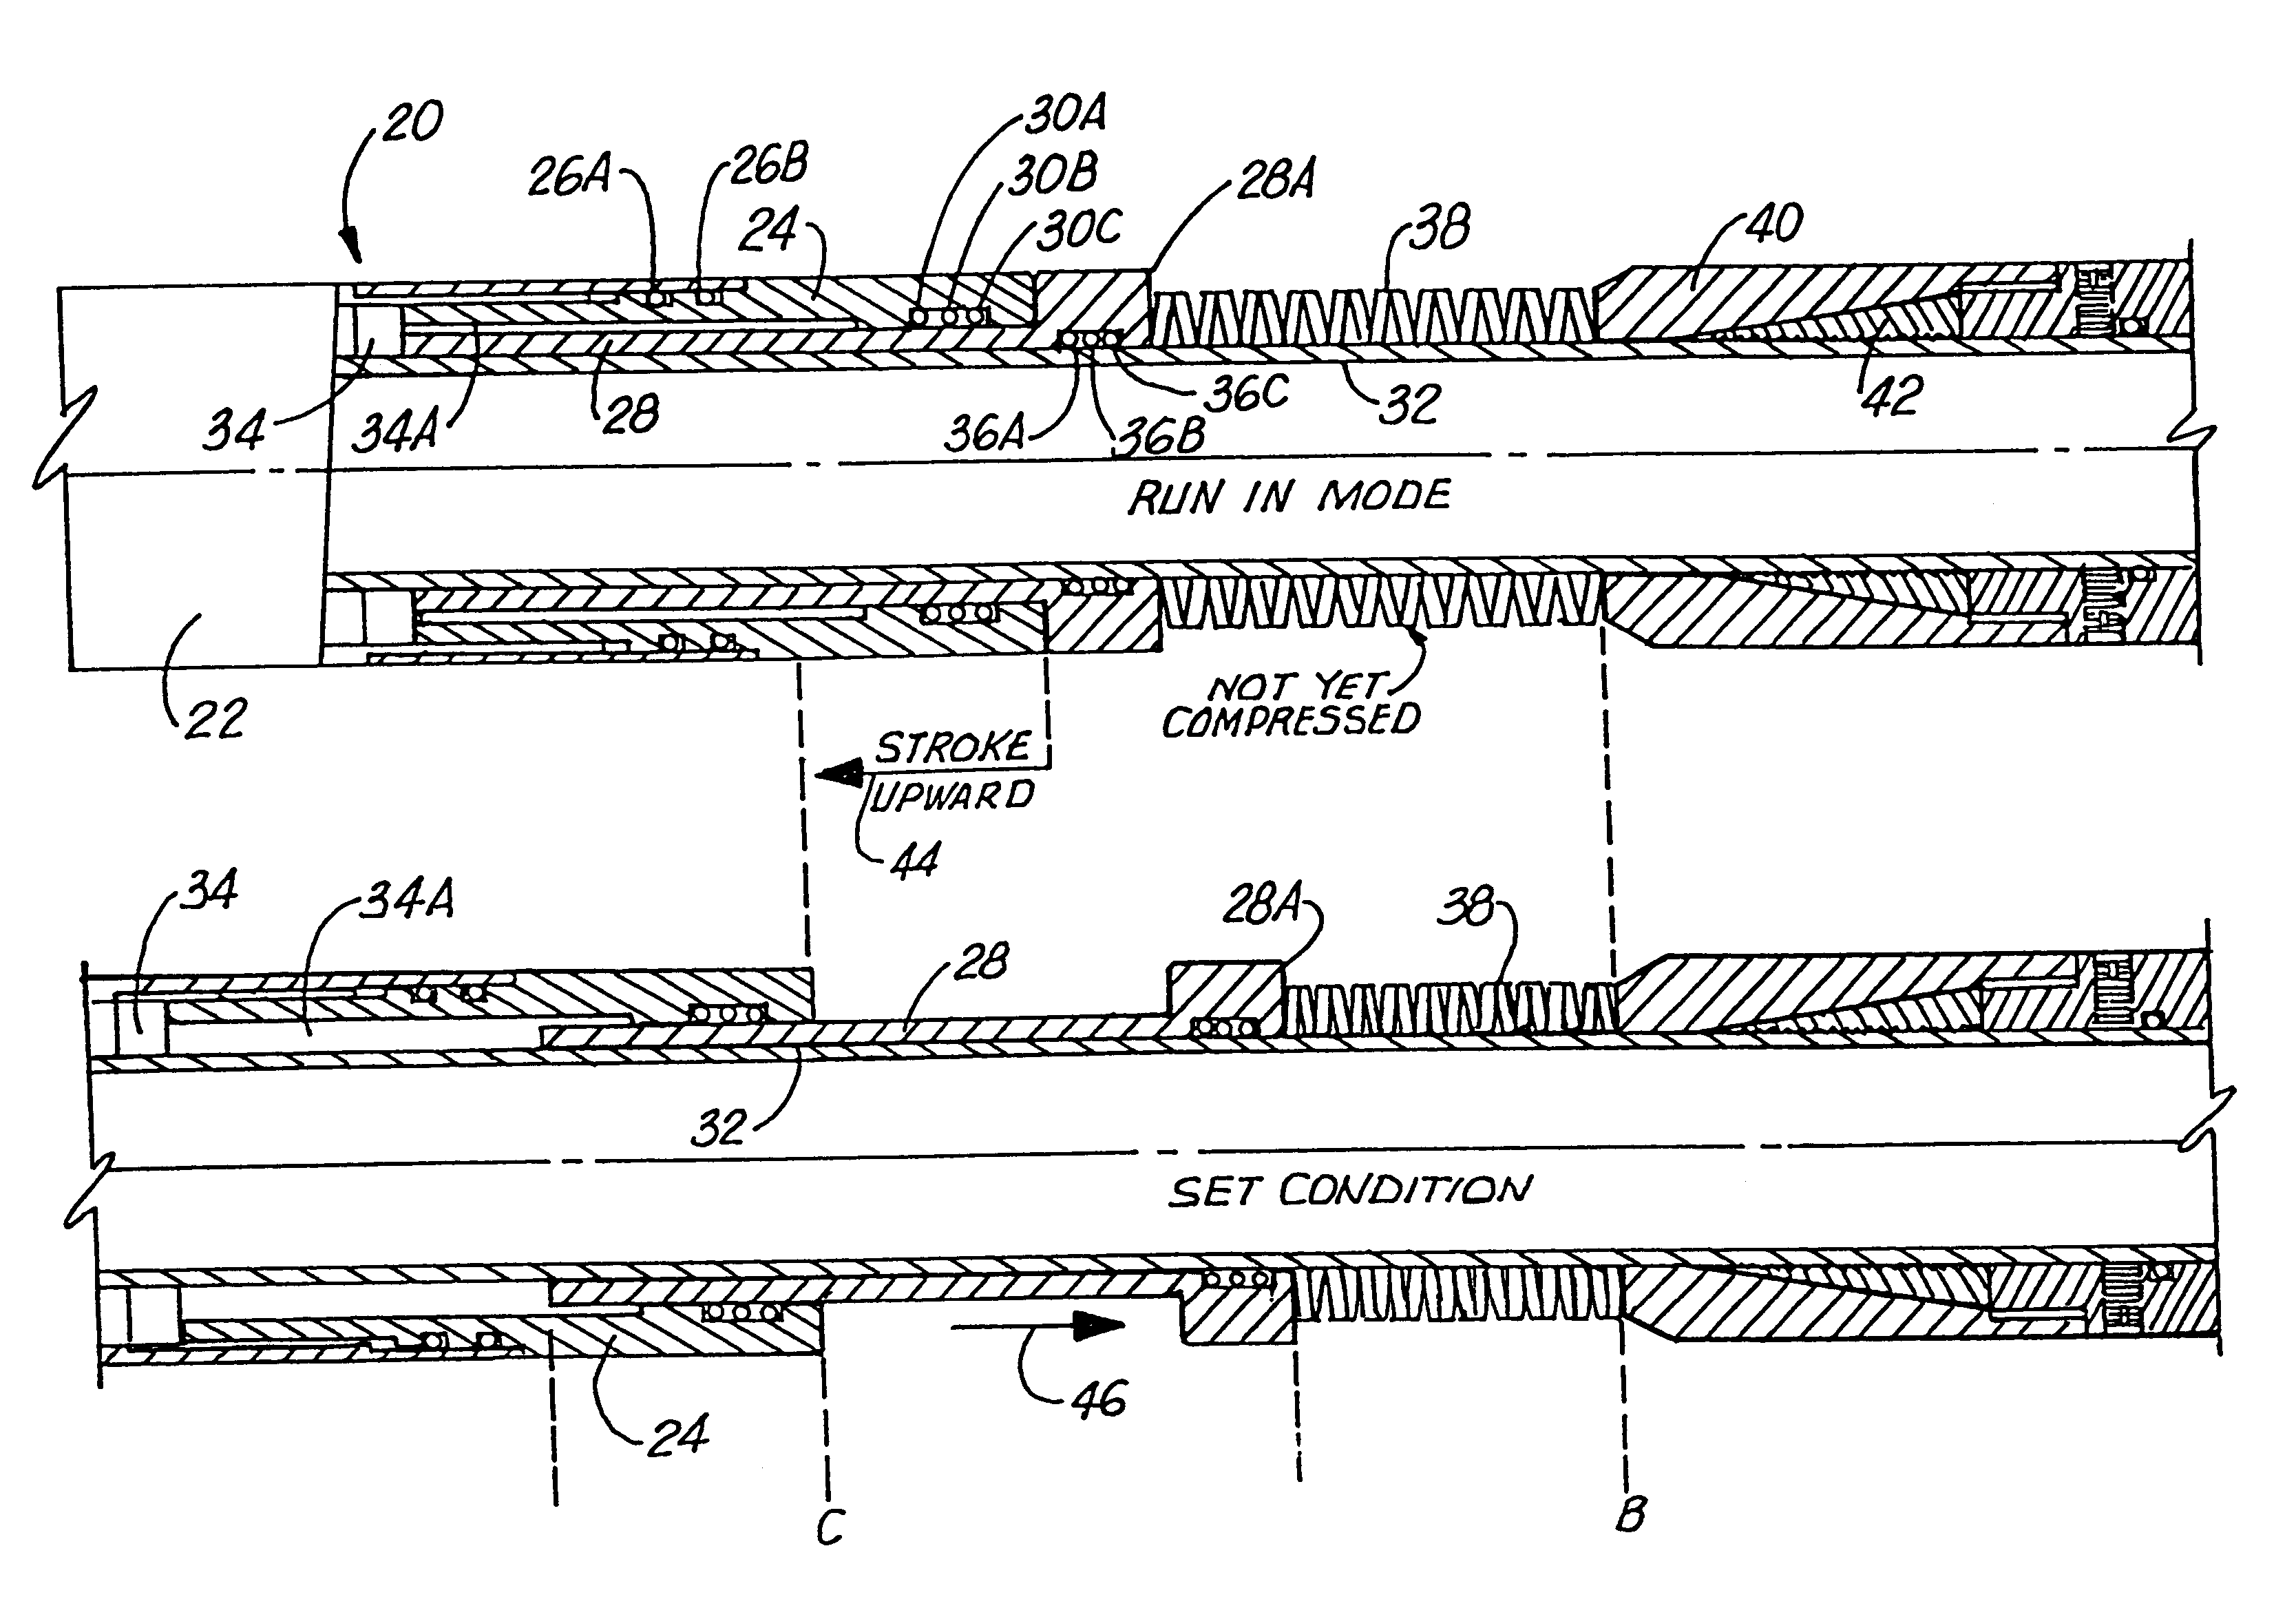 Apparatus and method for maintaining relatively uniform fluid pressure within an expandable well tool subjected to thermal variants